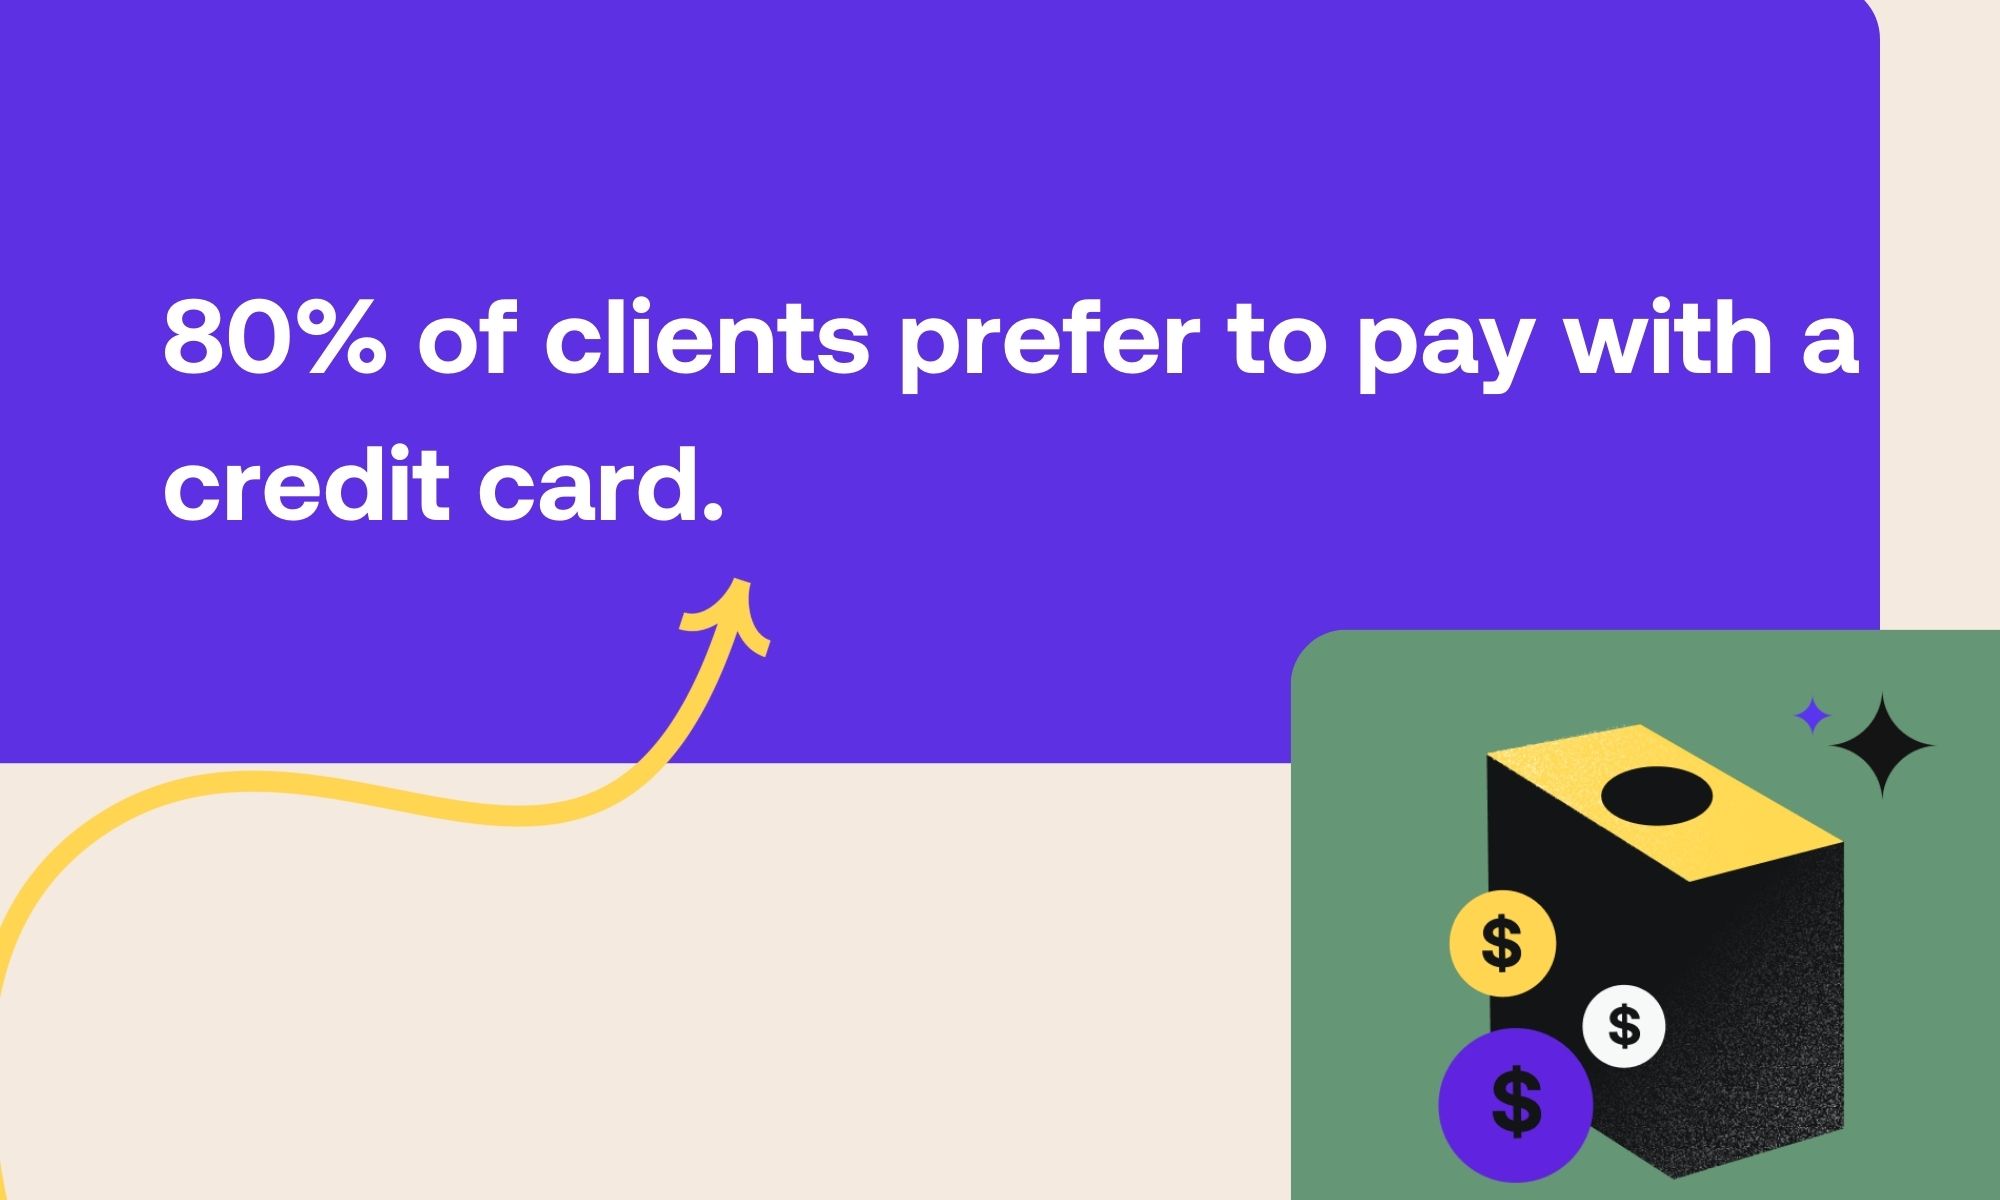 80 percent of clients prefer to pay with a debit card.